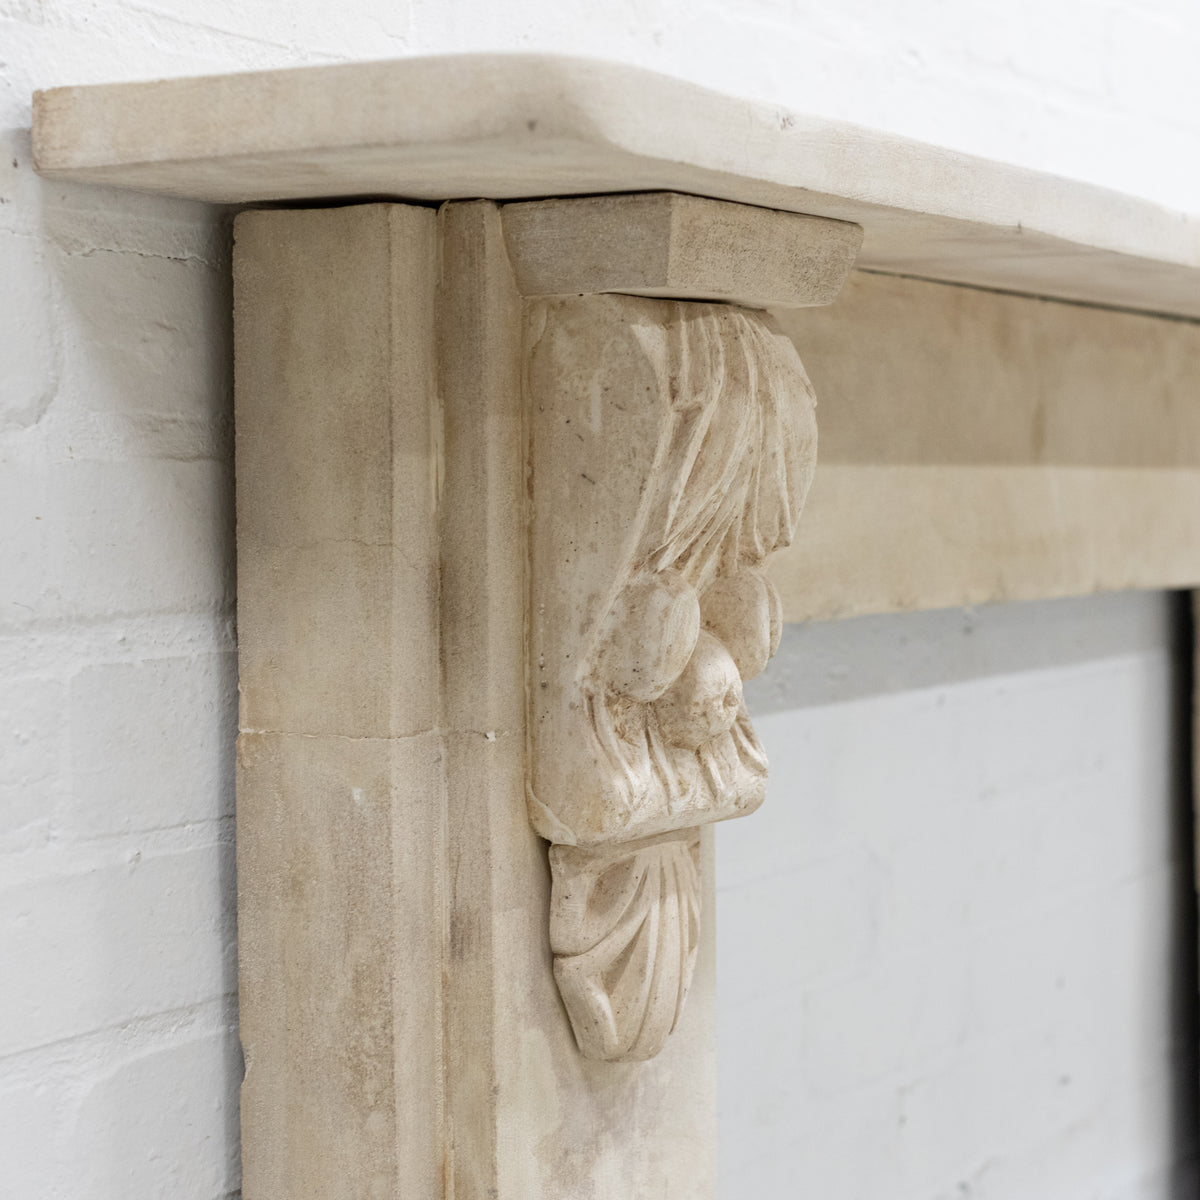 Antique Victorian Bath Stone Surround with Carved Corbels | The Architectural Forum